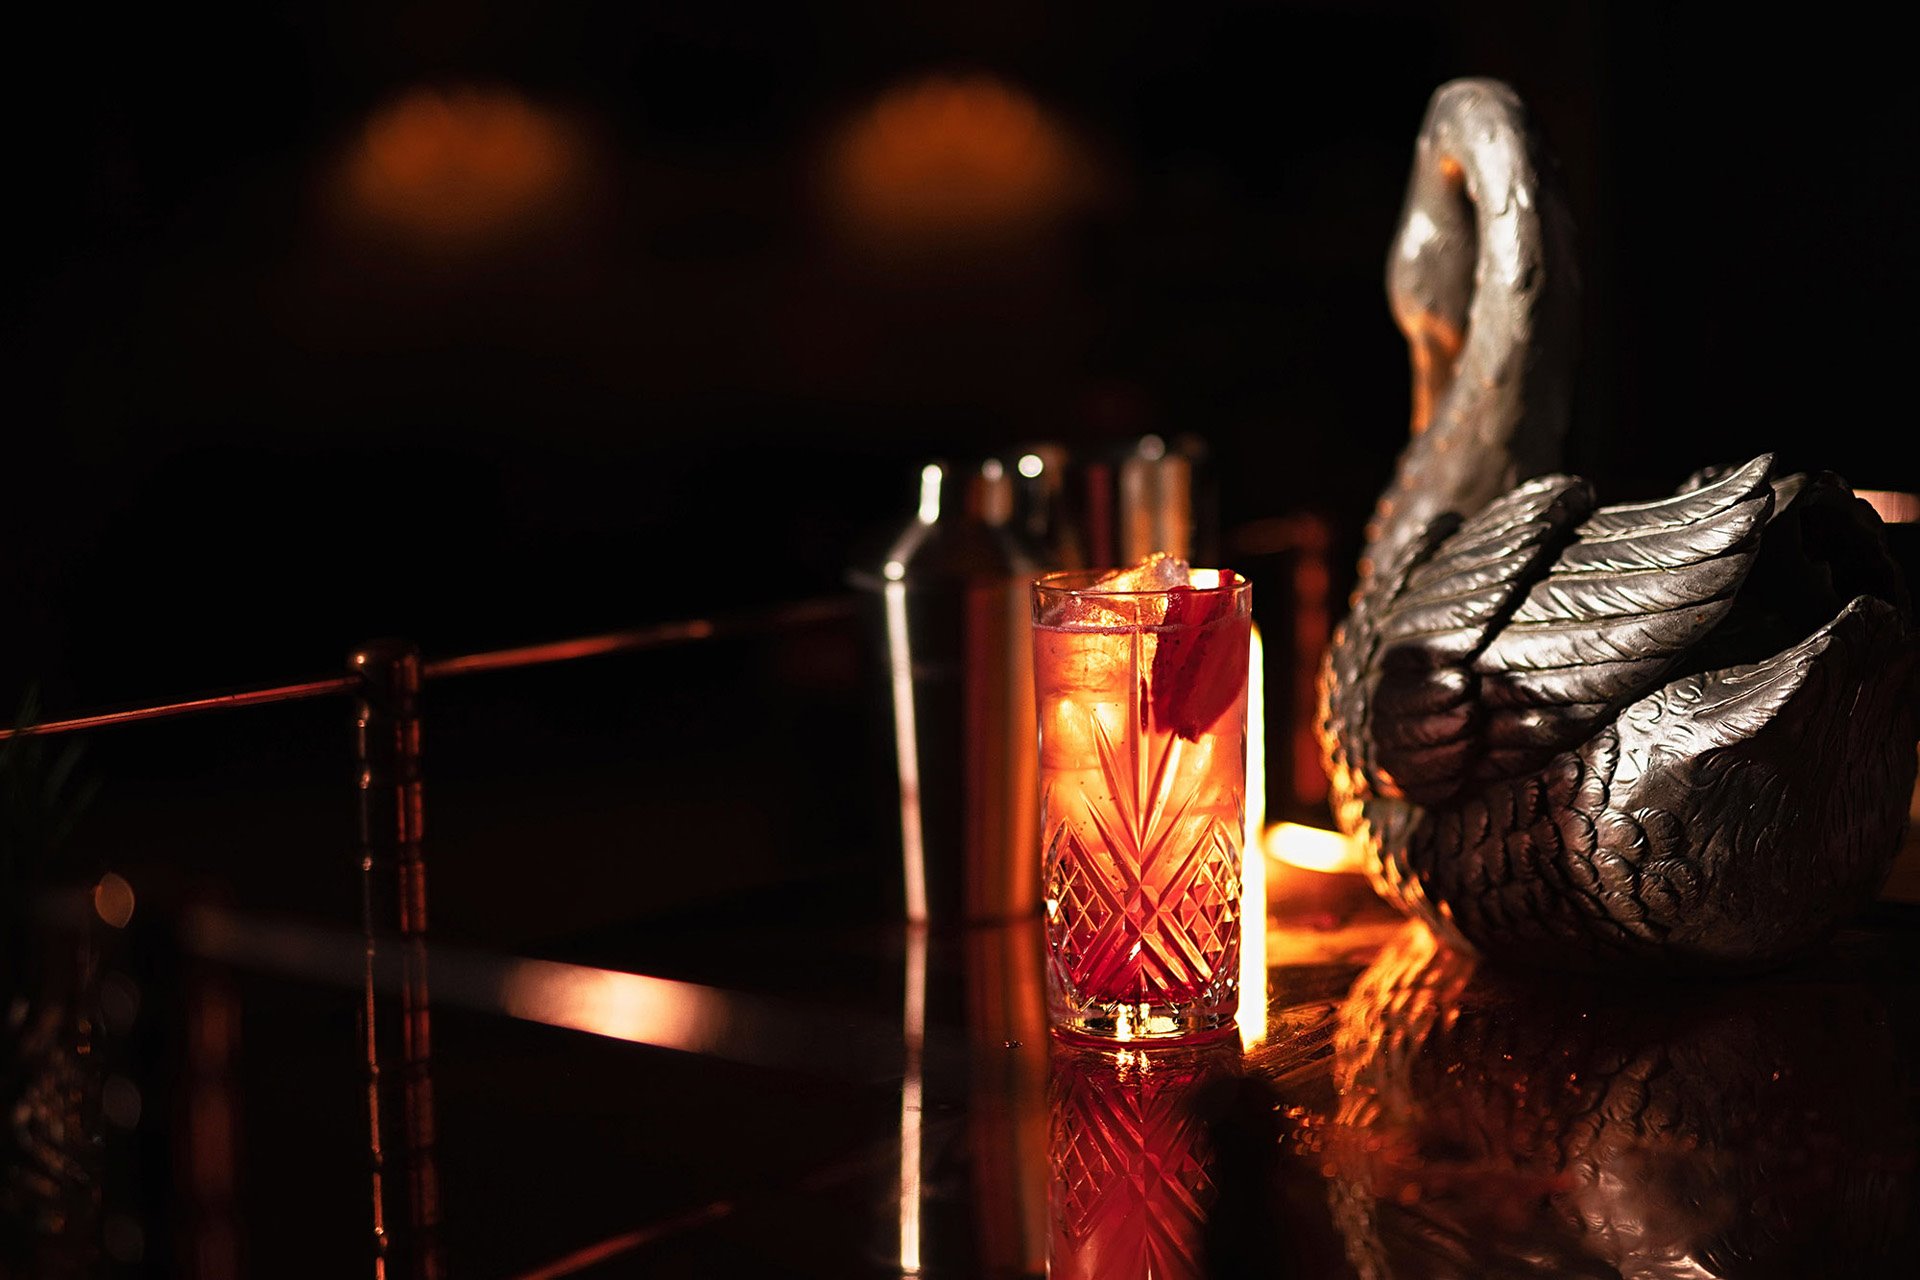 Cocktails served next to a swan at elmore court for a secret pop up cabaret dinner experience